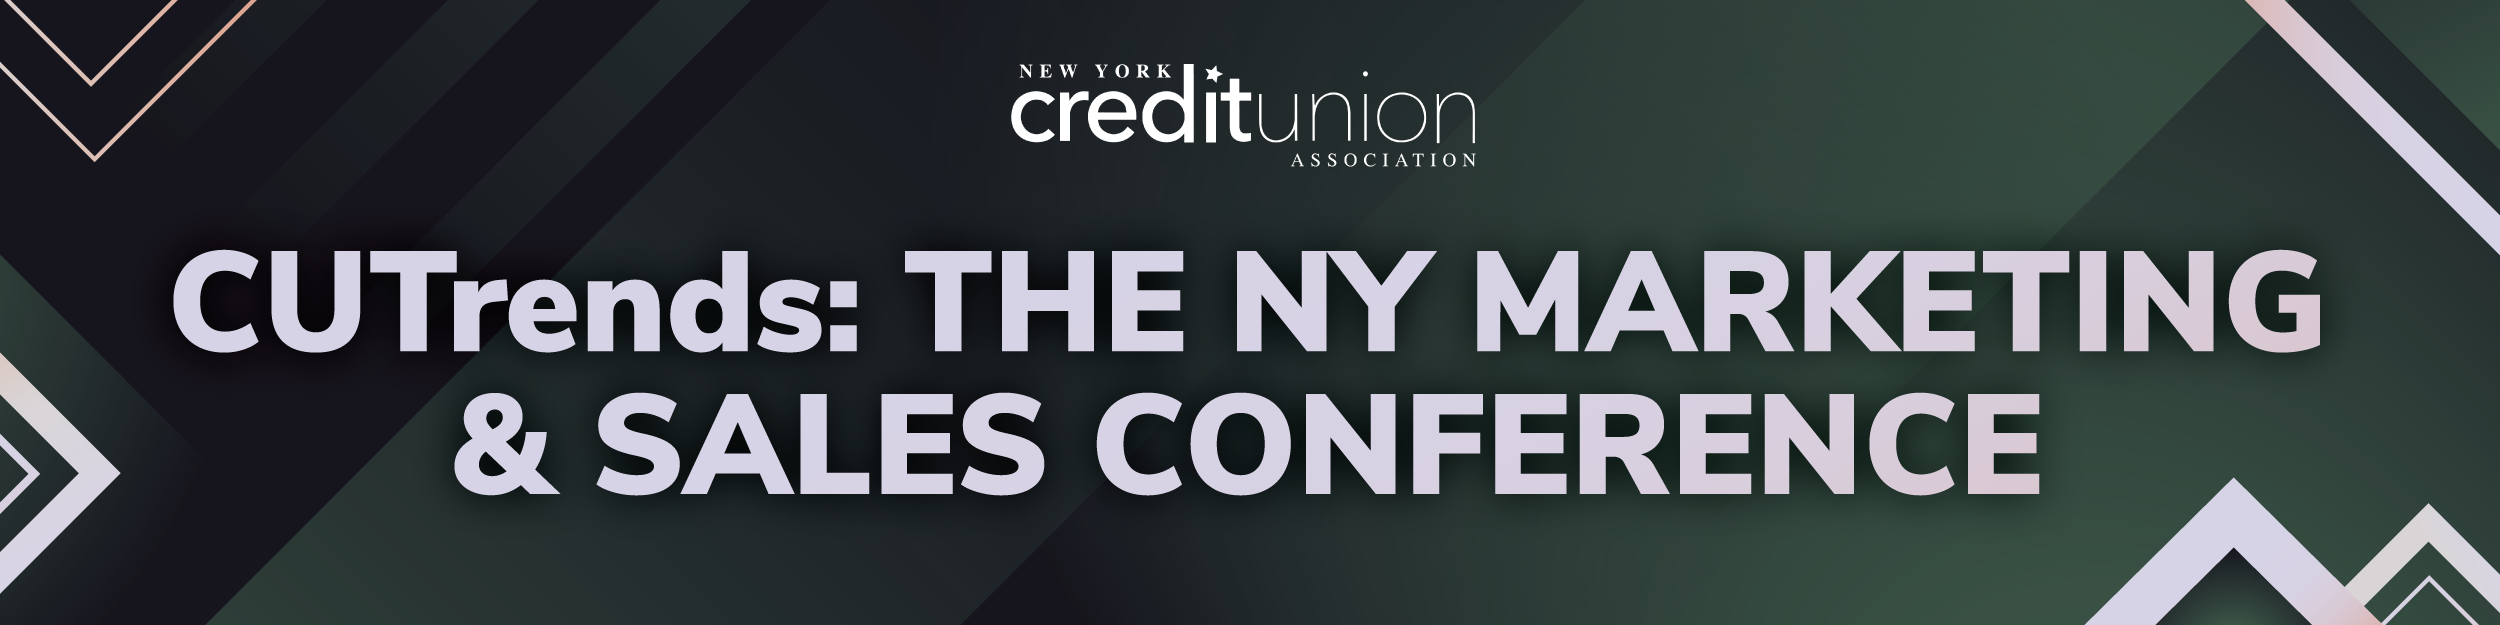 CUTrends-The NY Marketing & Sales Conference.png